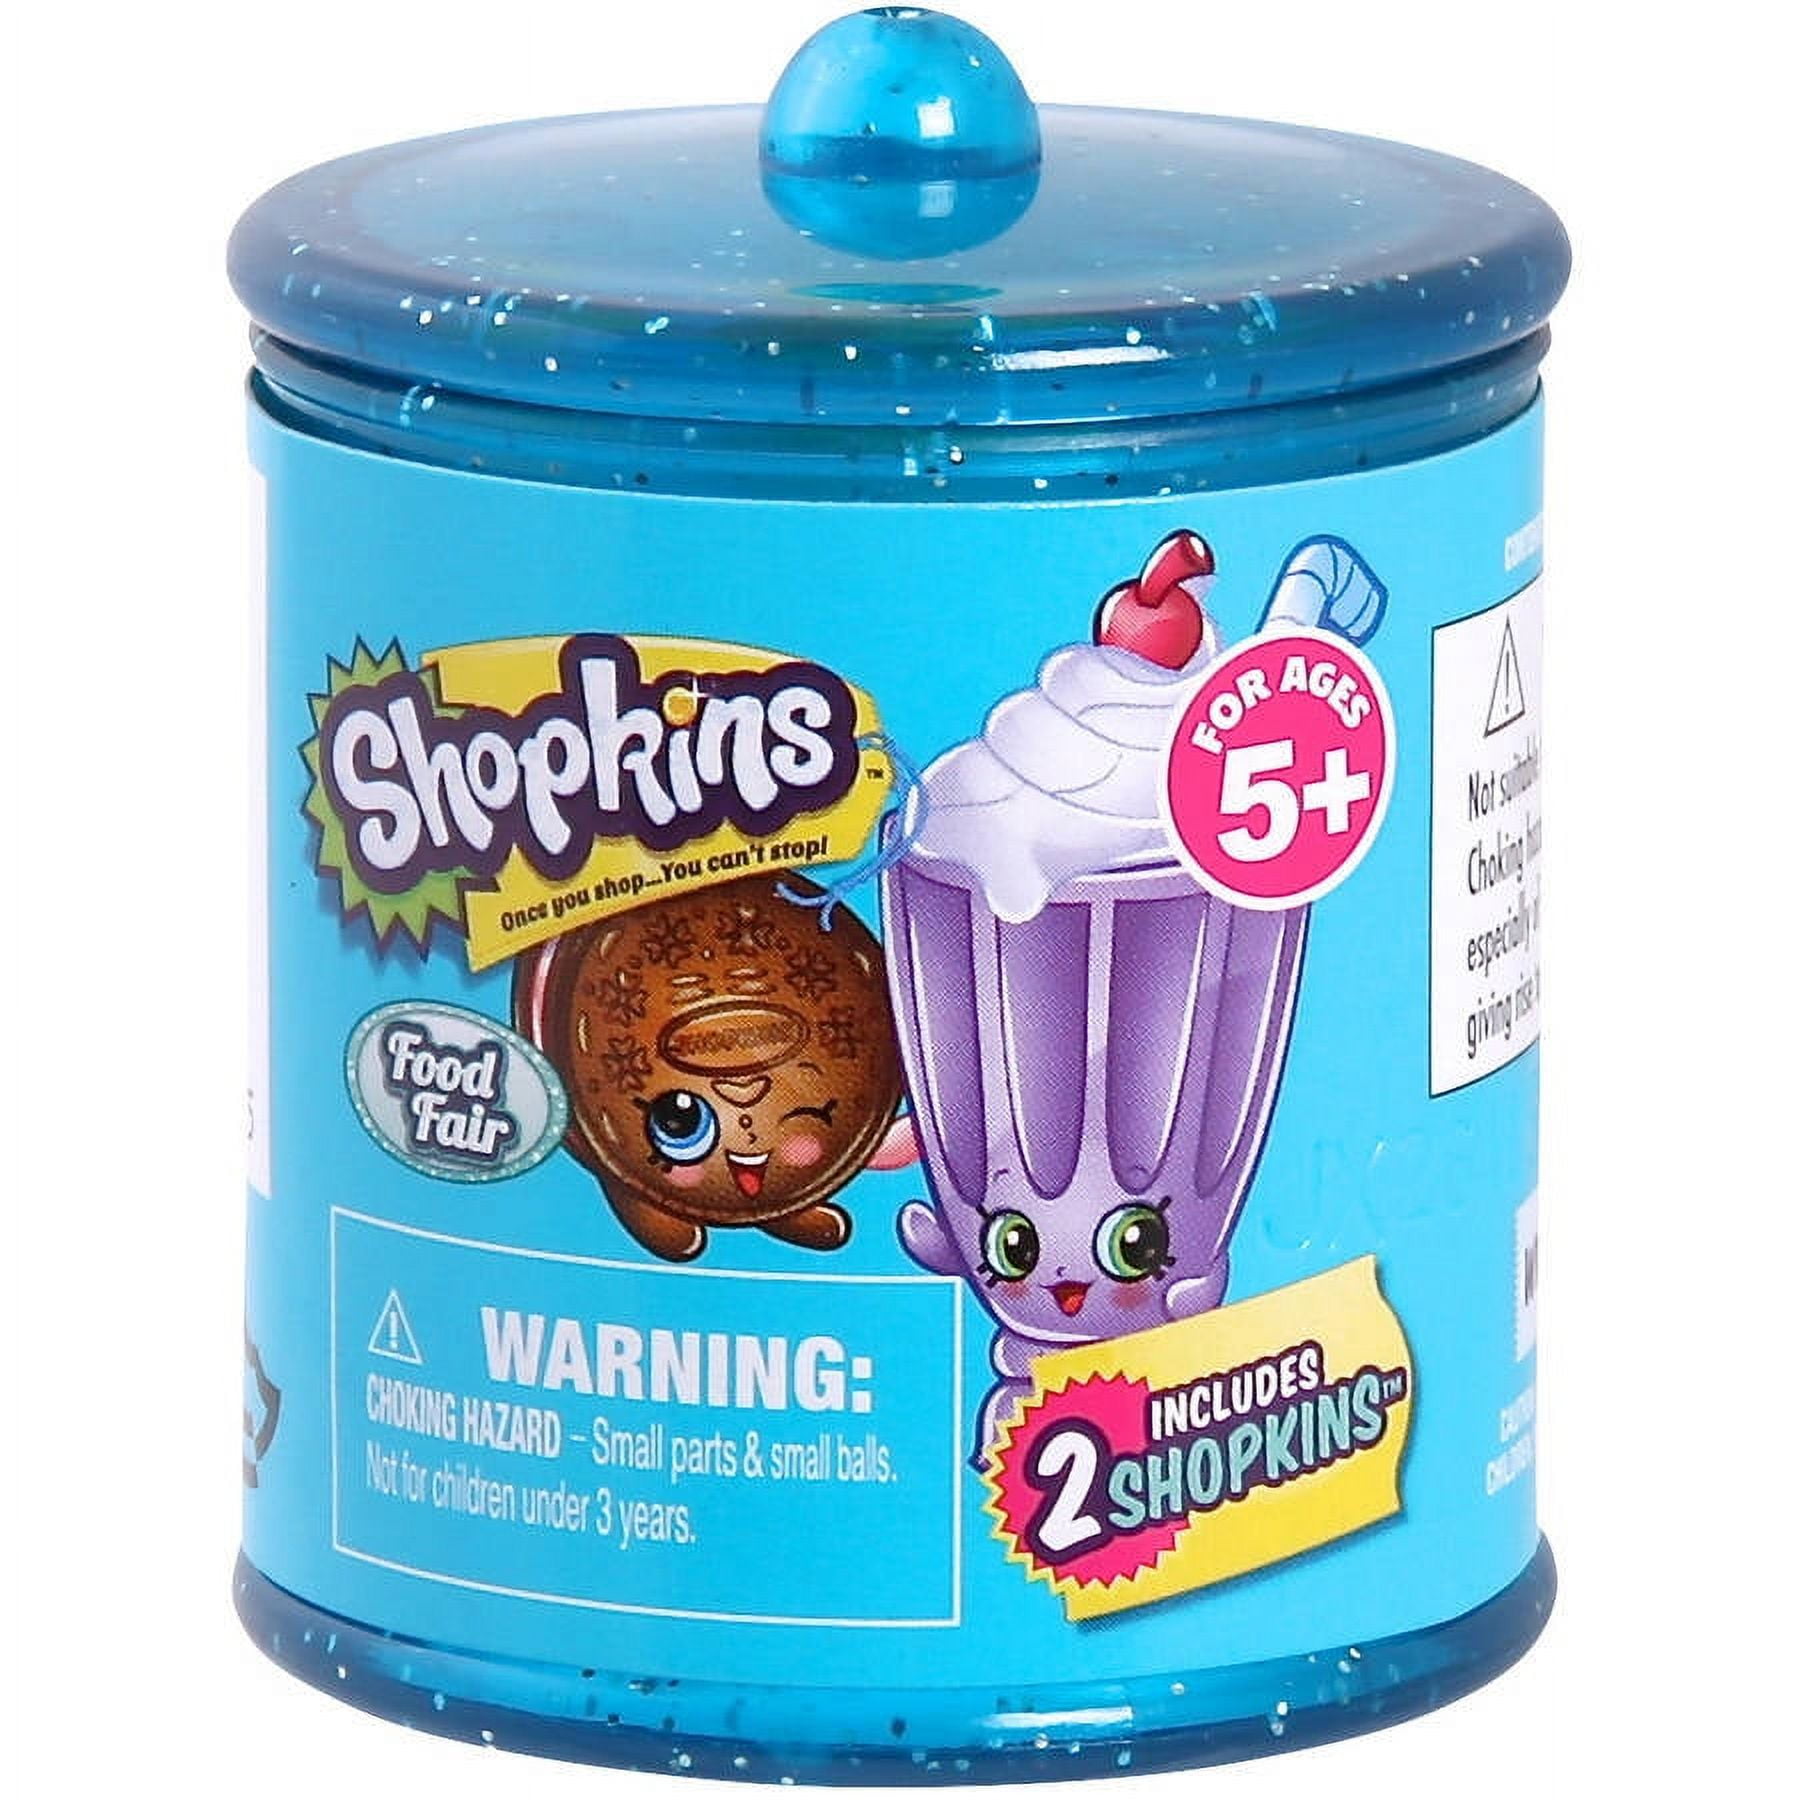 Shopkins Season 4 Display Case 22 Boxes With 2 Shopkins in Plastic Basket  Toys H